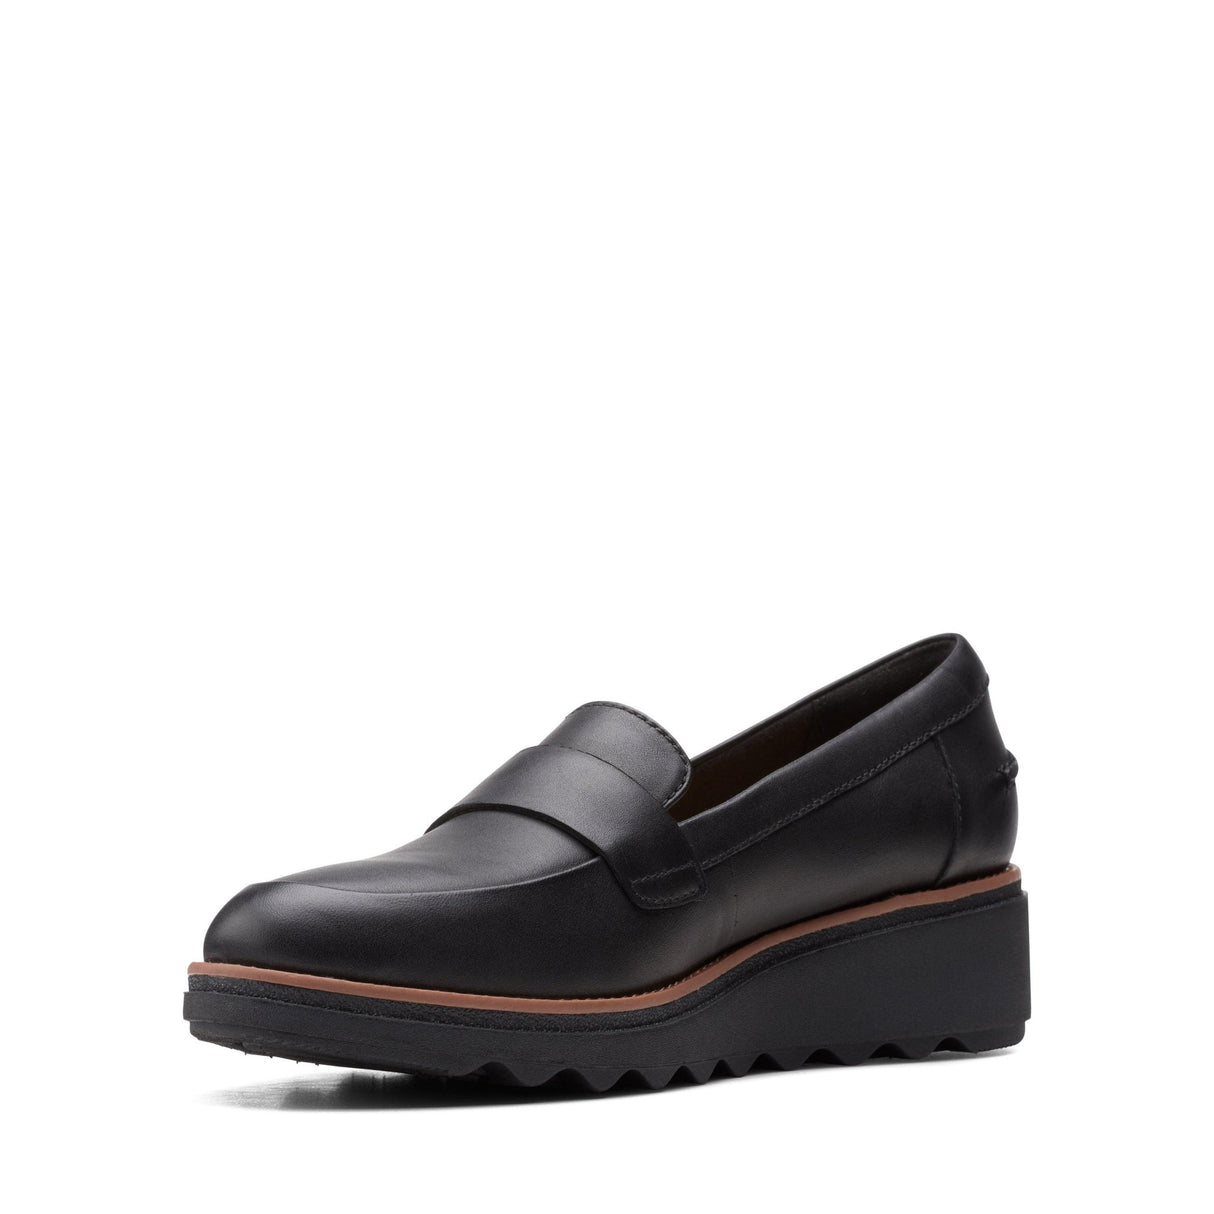 Clarks Women's Sharon Gracie Shoes Wide - A&M Clothing & Shoes